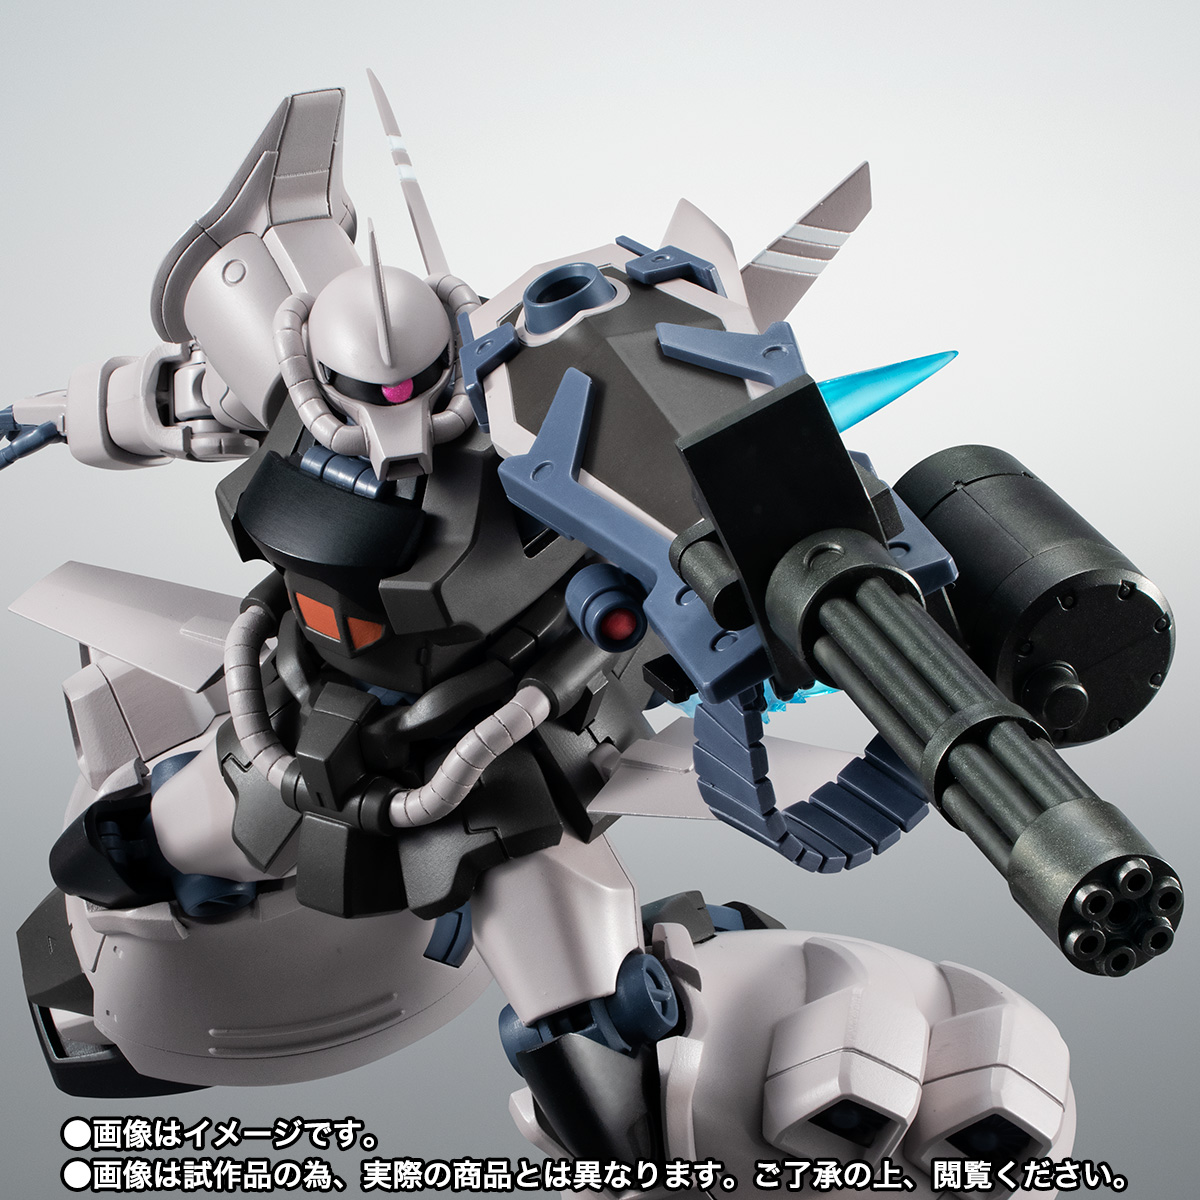 ROBOT魂 ＜SIDE MS＞ MS-07H-8 グフ・フライトタイプ ver. A.N.I.M.E. 01